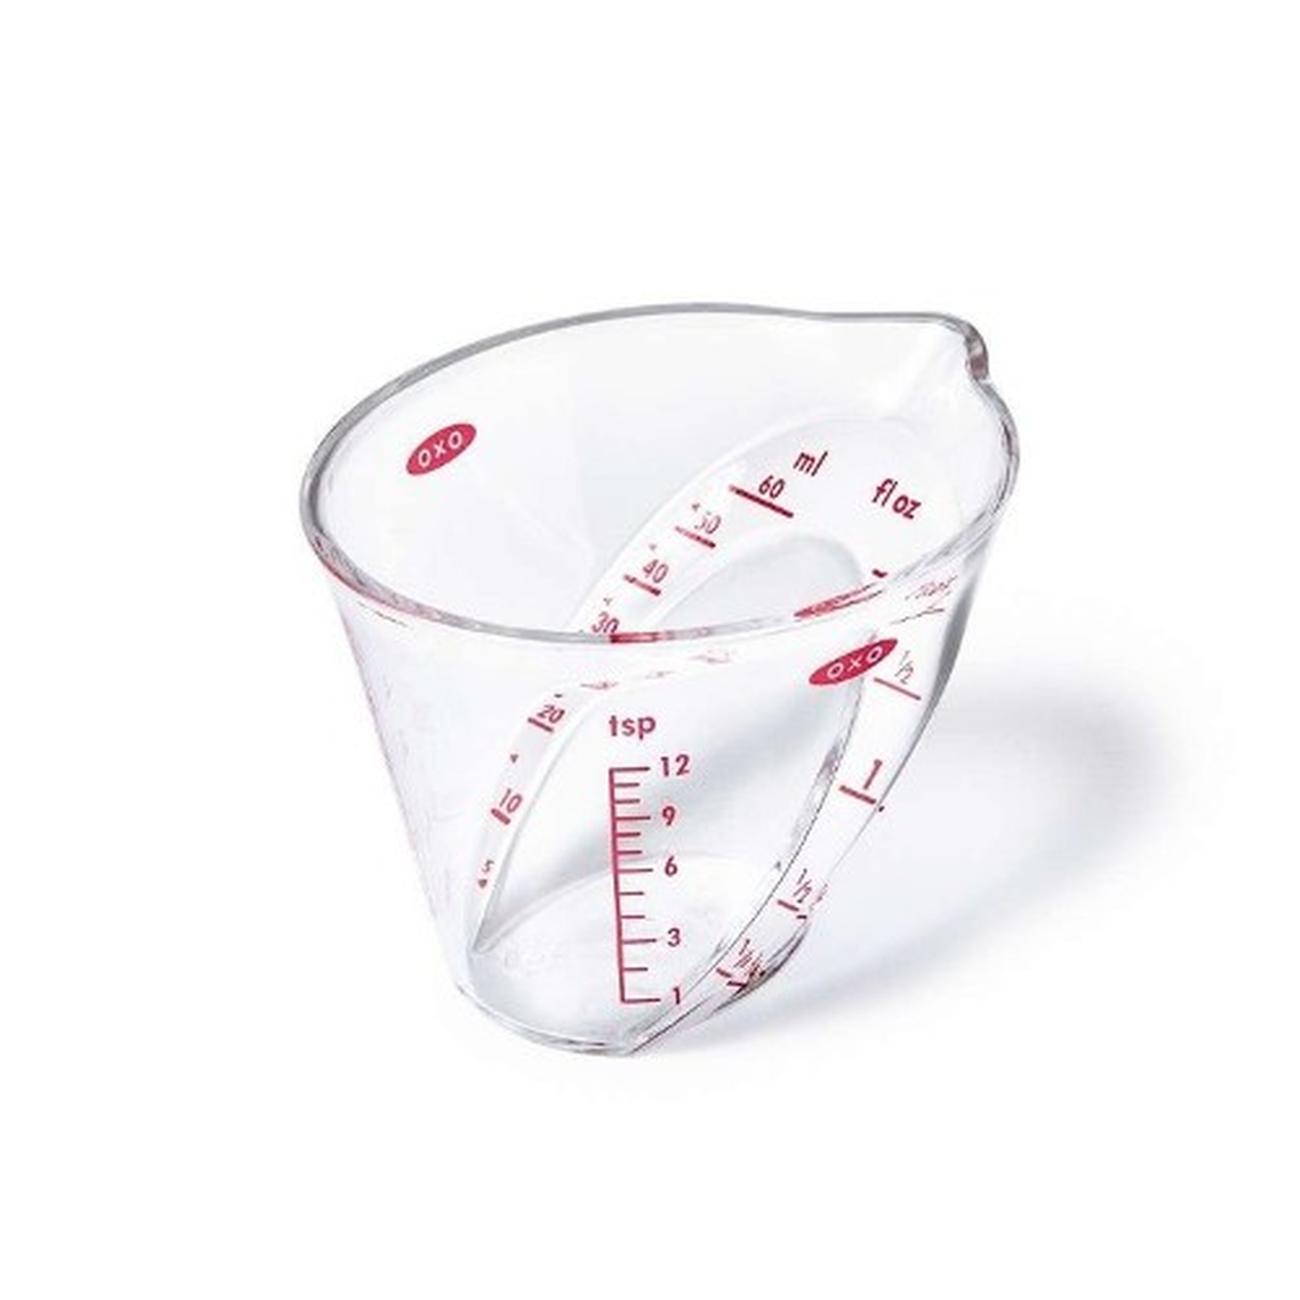 https://www.thekitchenwhisk.ie/contentFiles/productImages/Large/oxo-mini-angled-measuring-cup.jpg